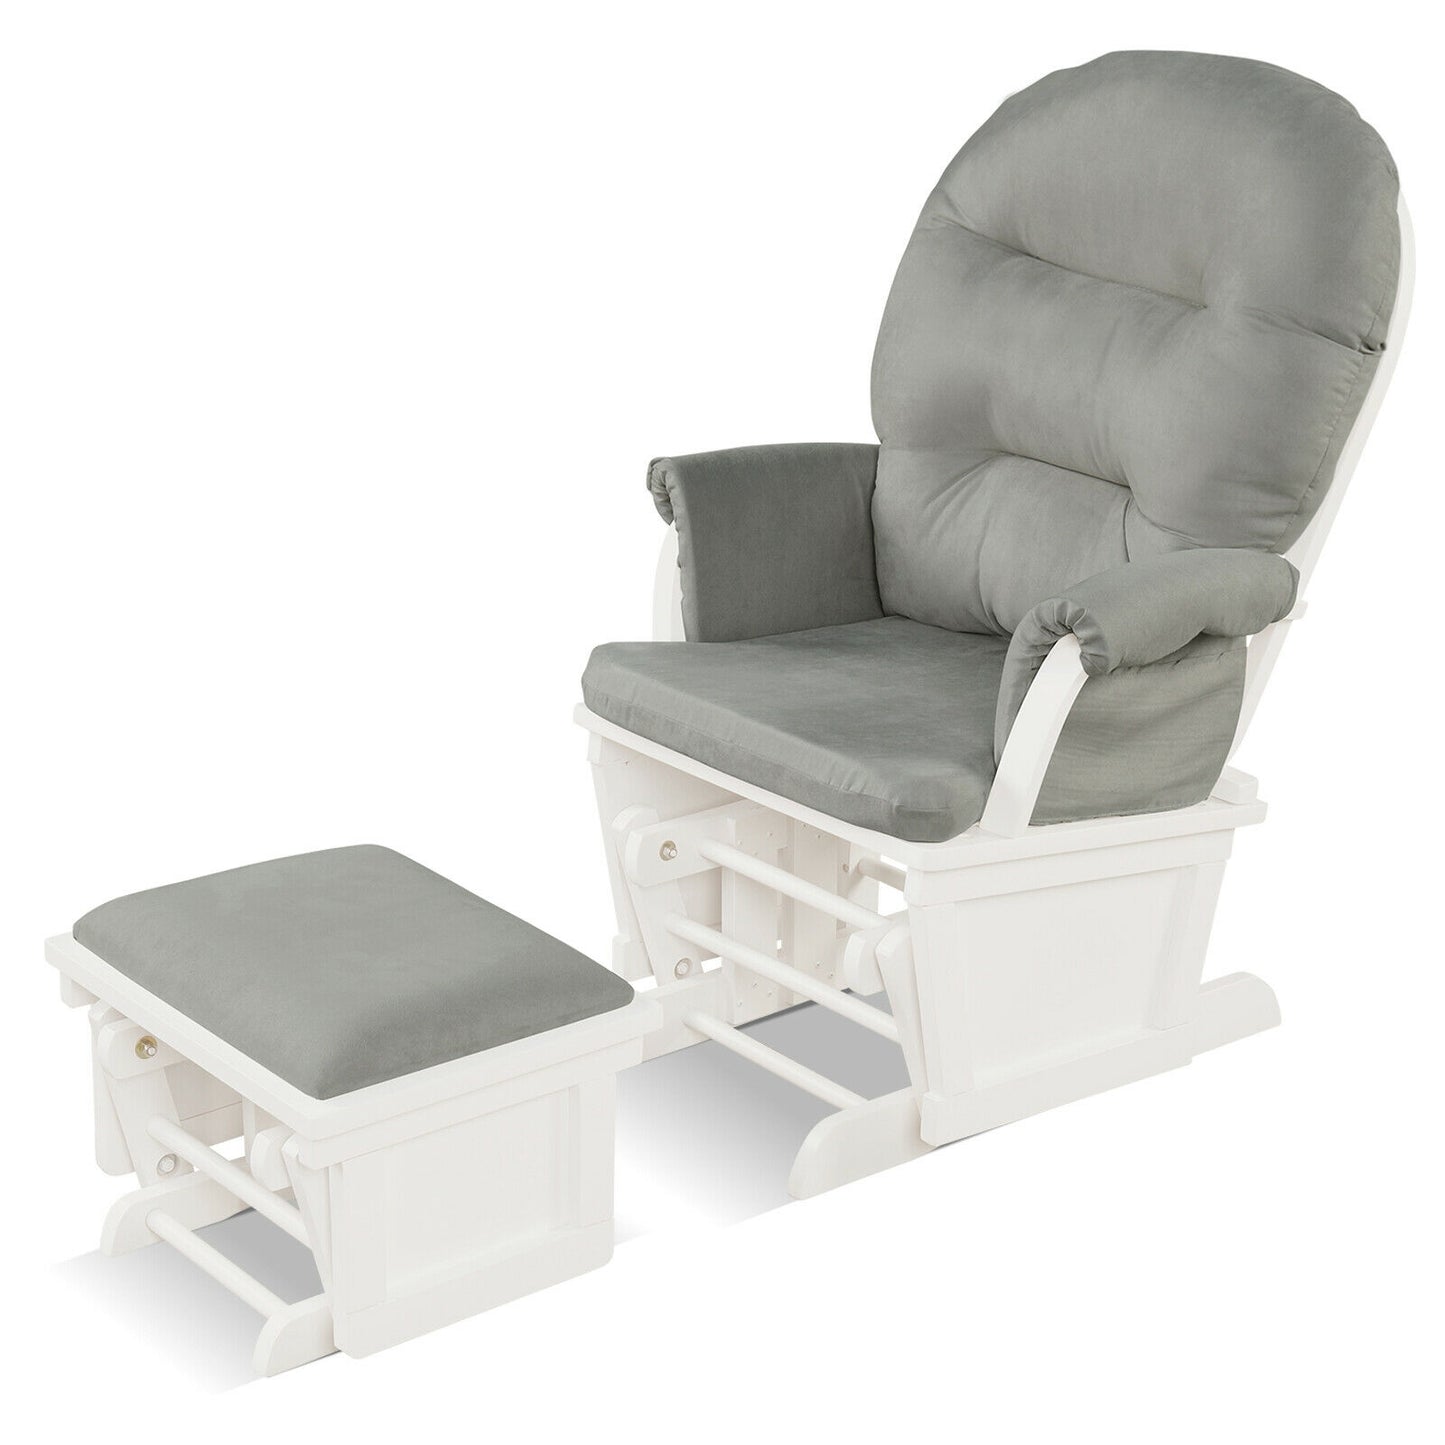 Wood Baby Glider and Ottoman Cushion Set with Padded Armrests for Nursing-Light Gray